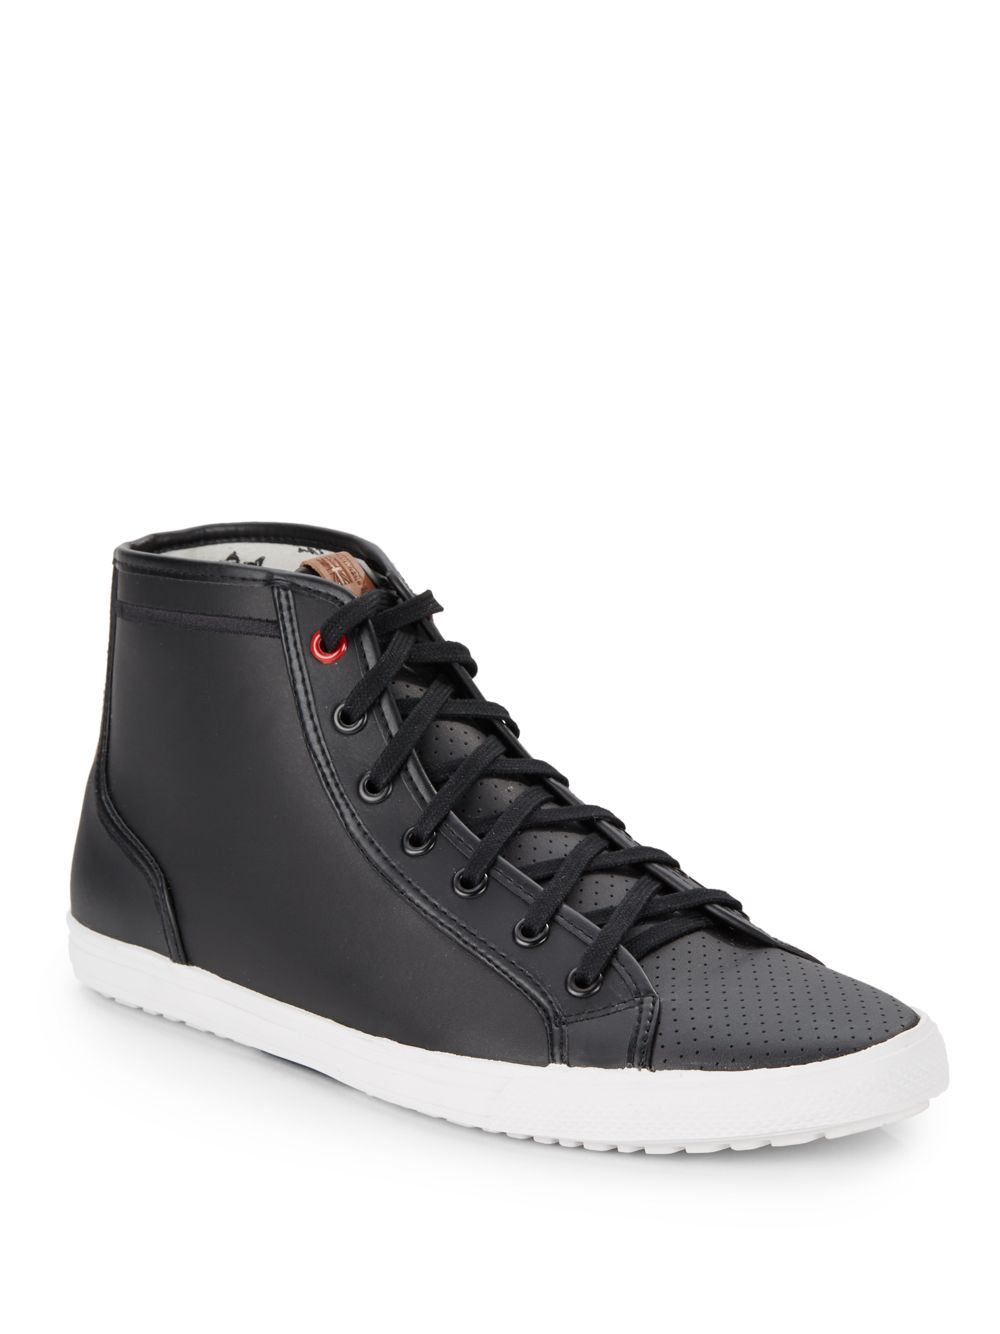 Lyst - Ben Sherman Conall Perforated Leather Hi-Top Sneakers in Black ...